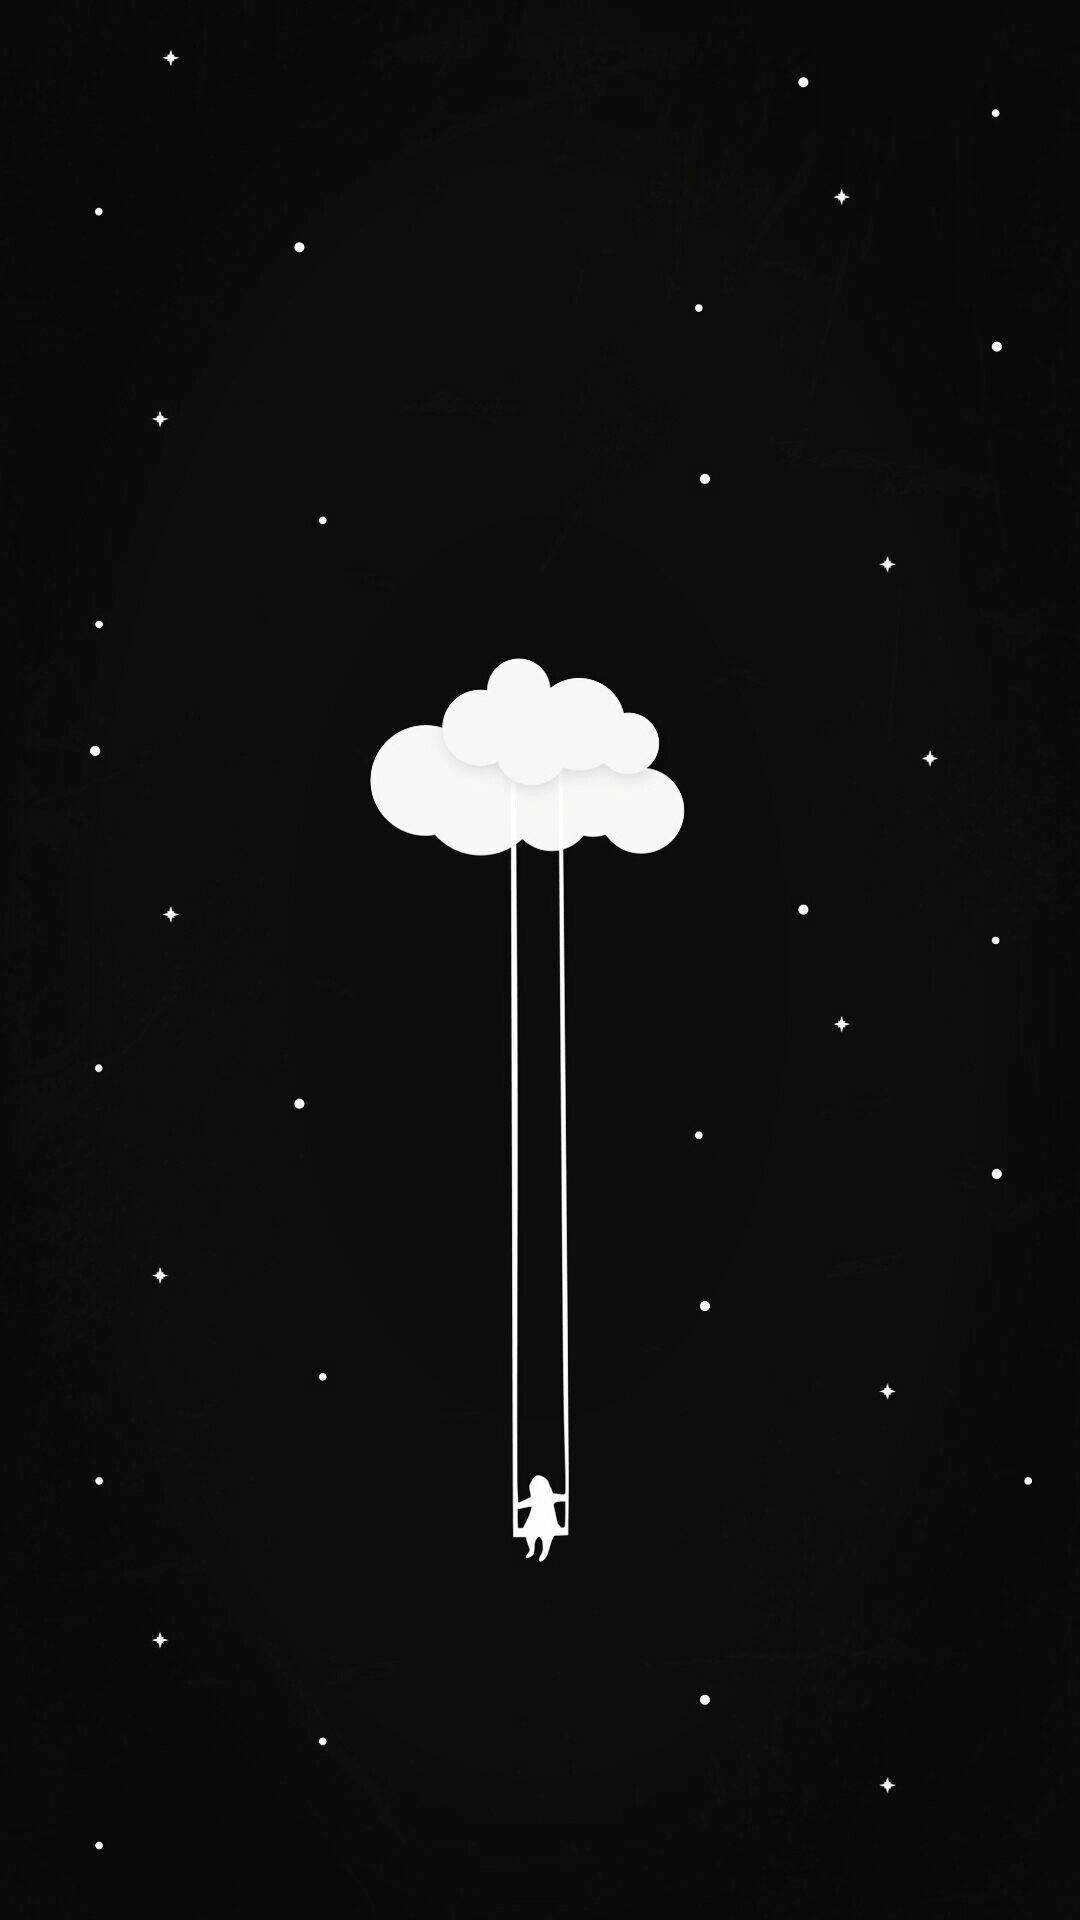 Cloud With Swing Basic Wallpaper